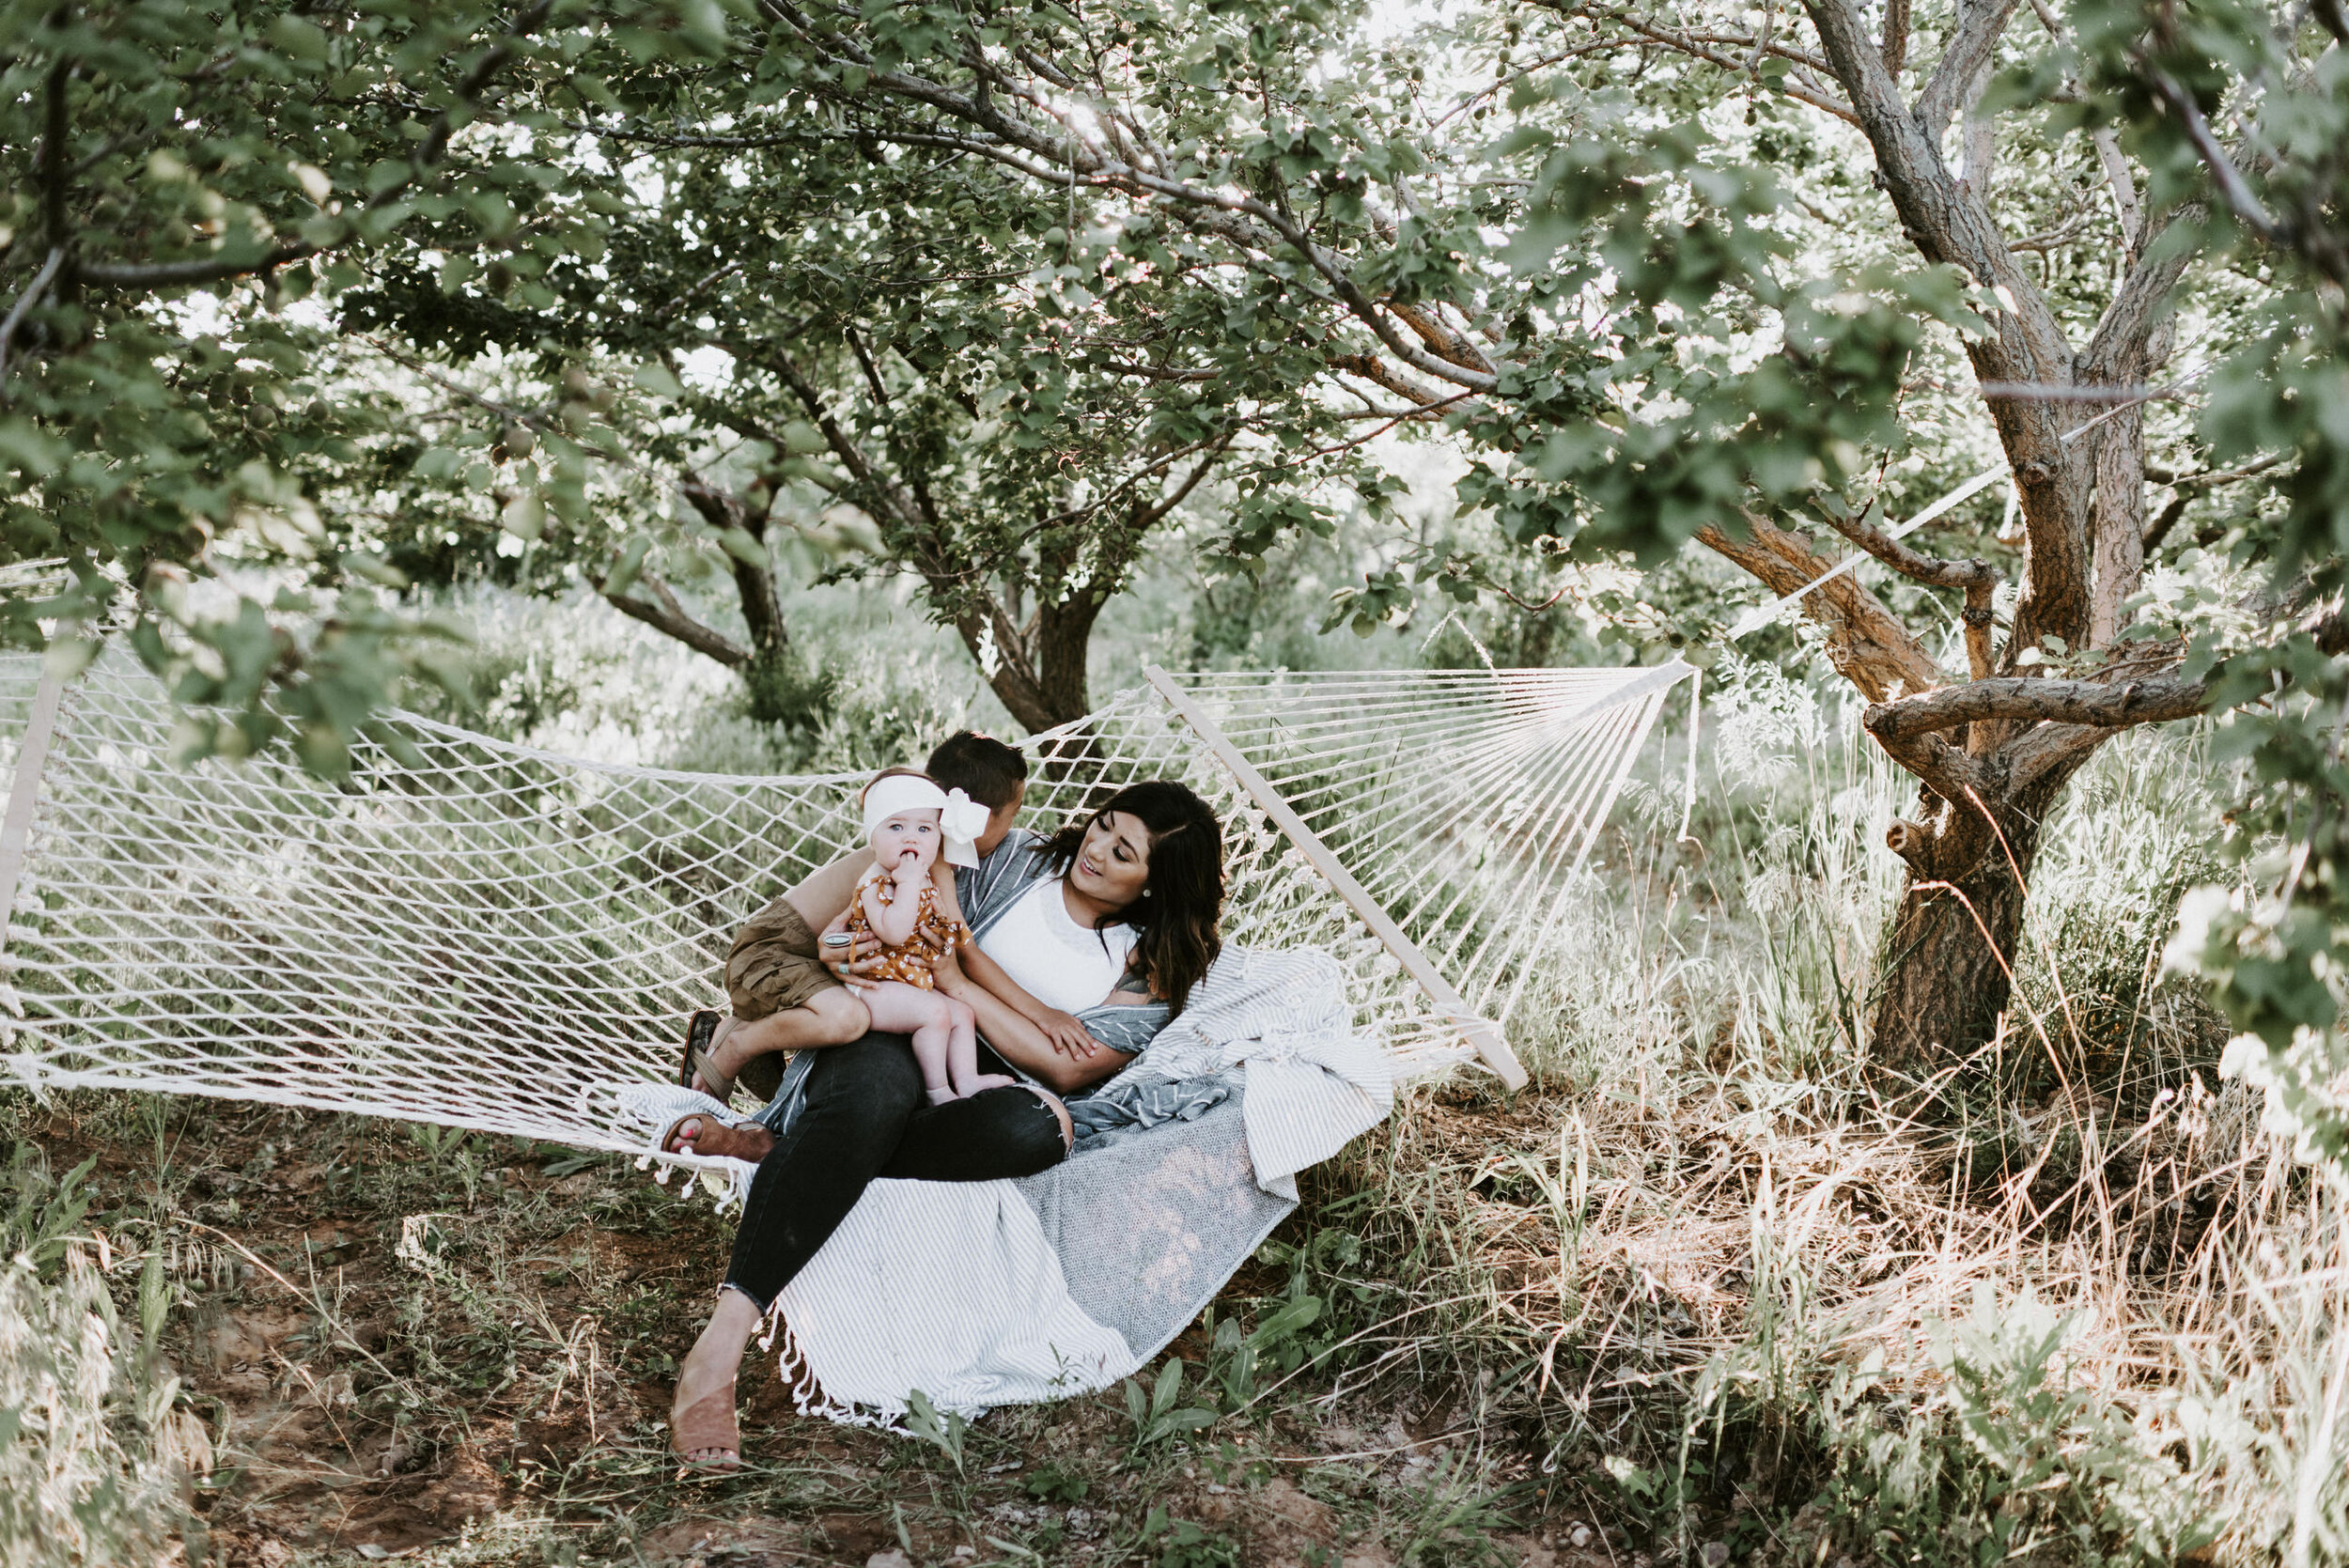 mom sitting in hammock with children in apple orchard